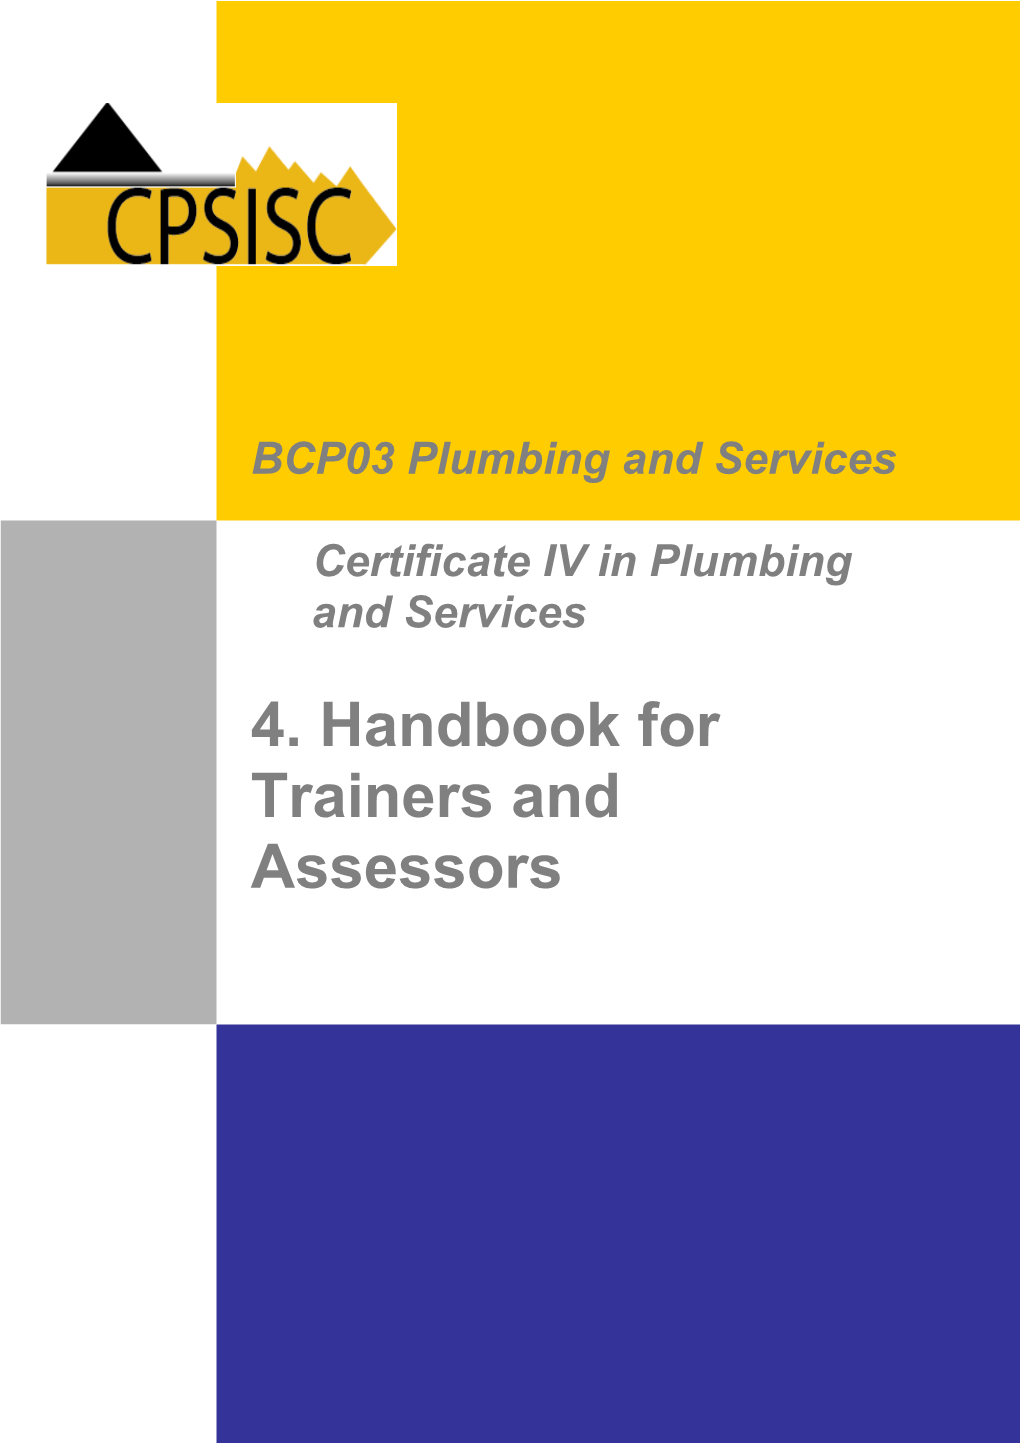 Handbook for Trainers and Assessors